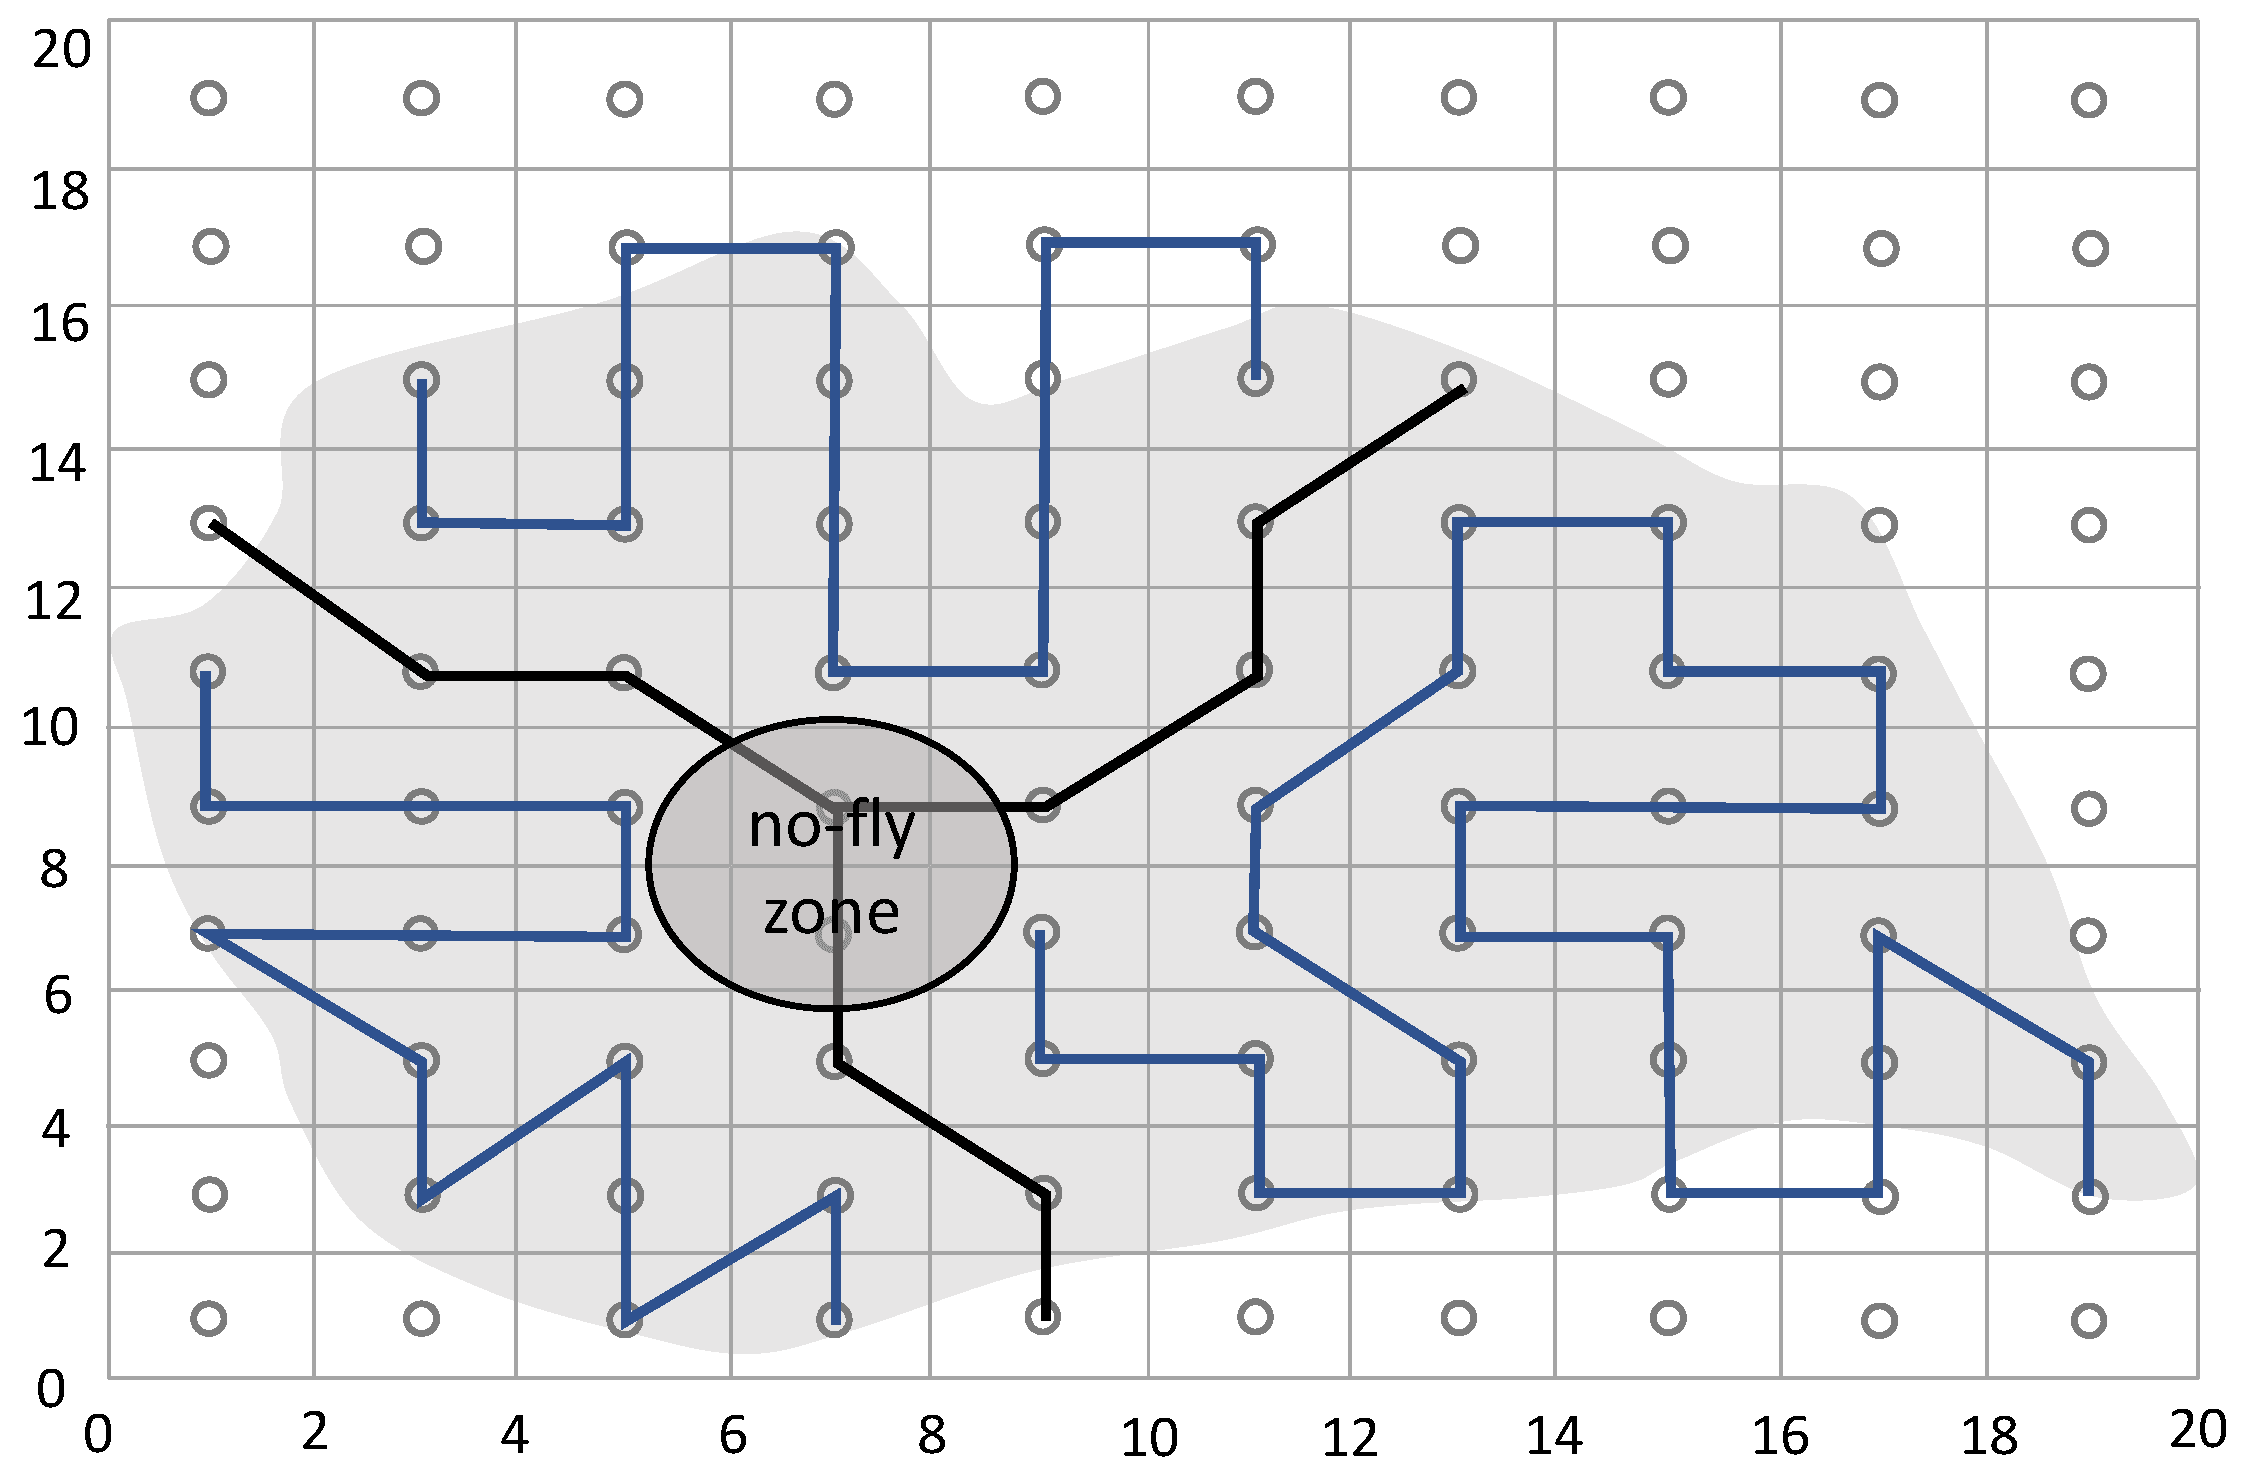 Coverage path planning in irregular-shaped areas containing no-fly zones in the subregions bounds for collision avoidance.